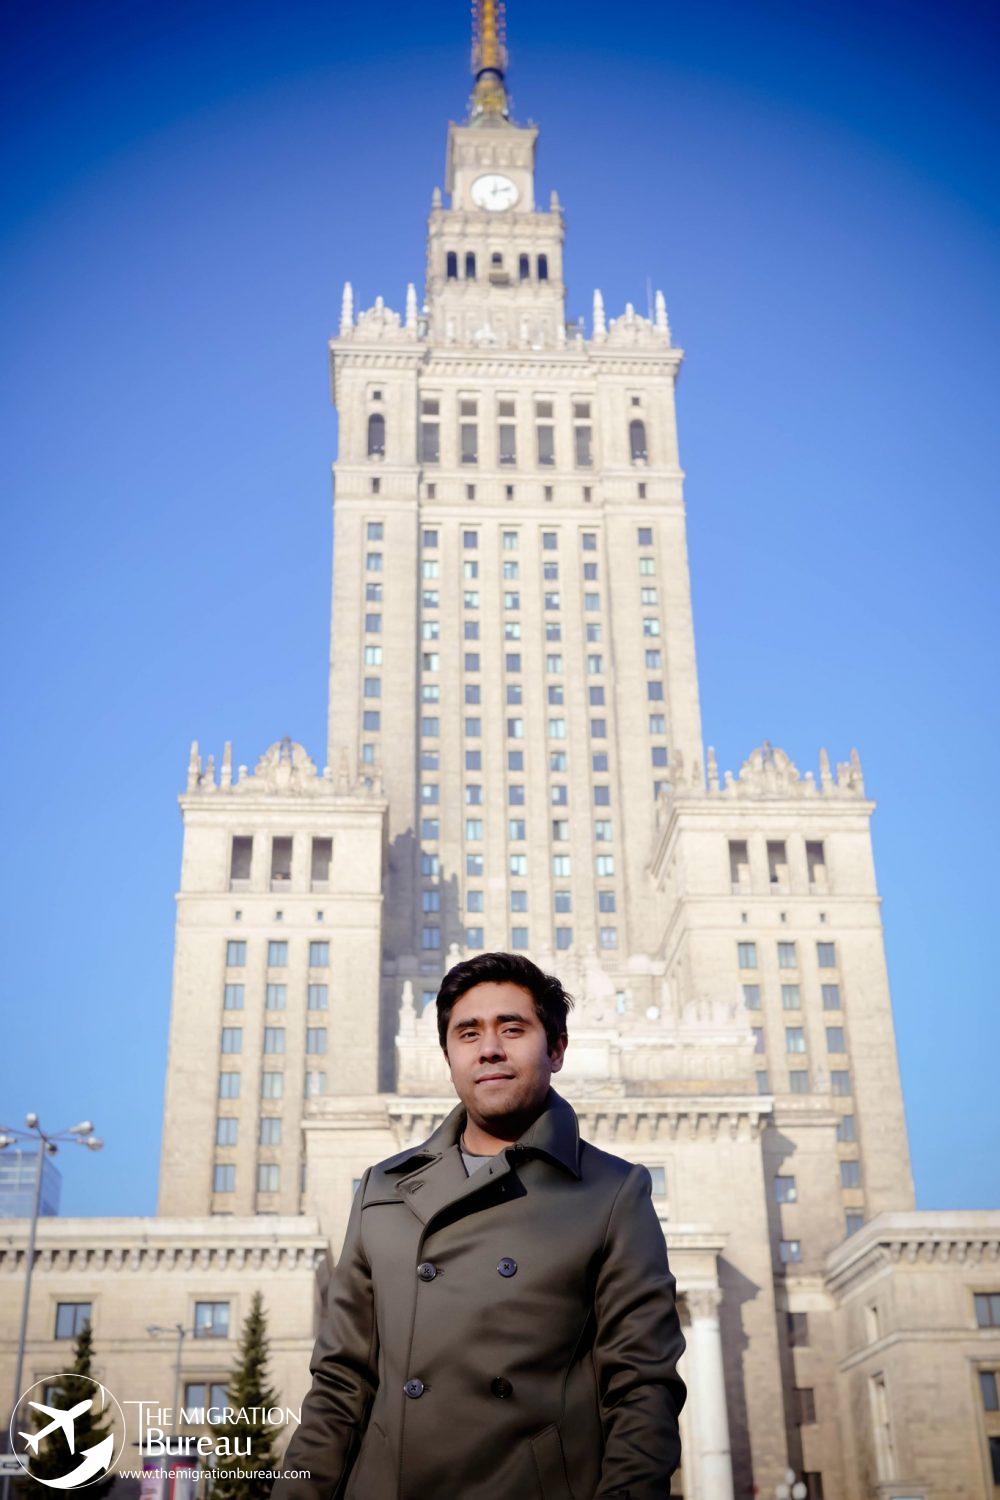 Director of The Migration Bureau in front of palace of Culture and Science. Offering immigration consultations.